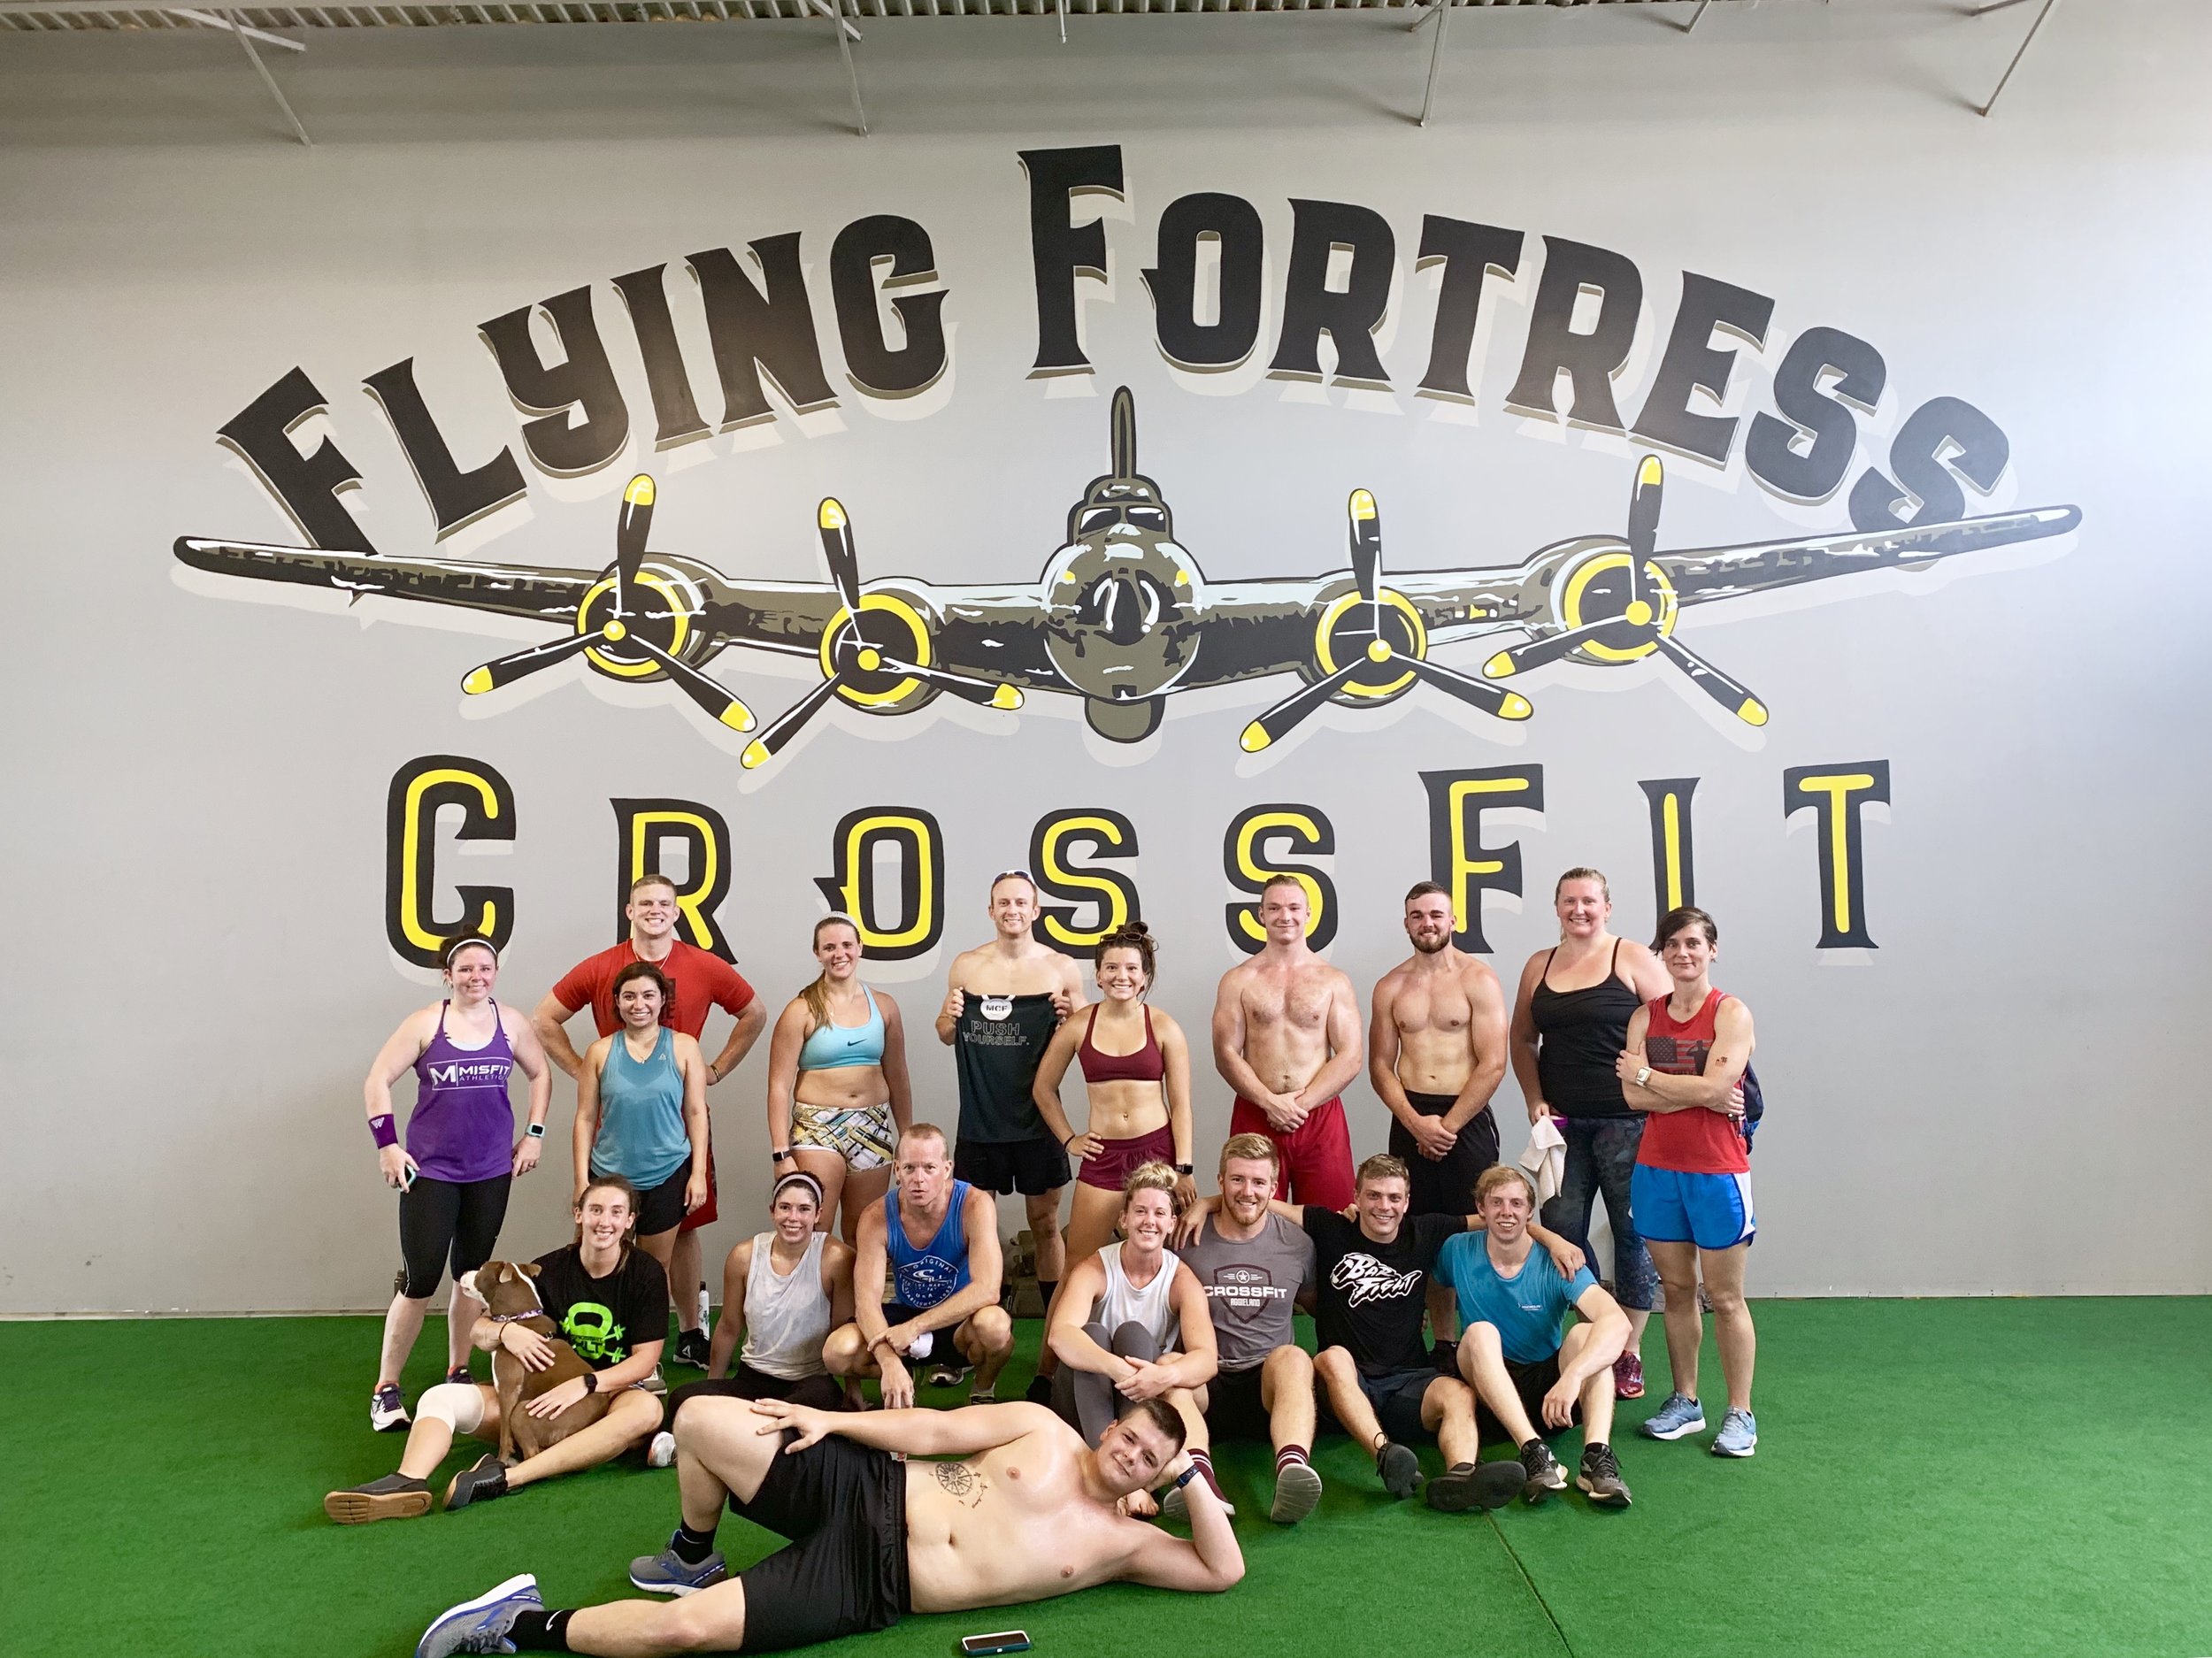 Saturday’s Workout in honor of Darby’s birthday! (Darby is front and center!)